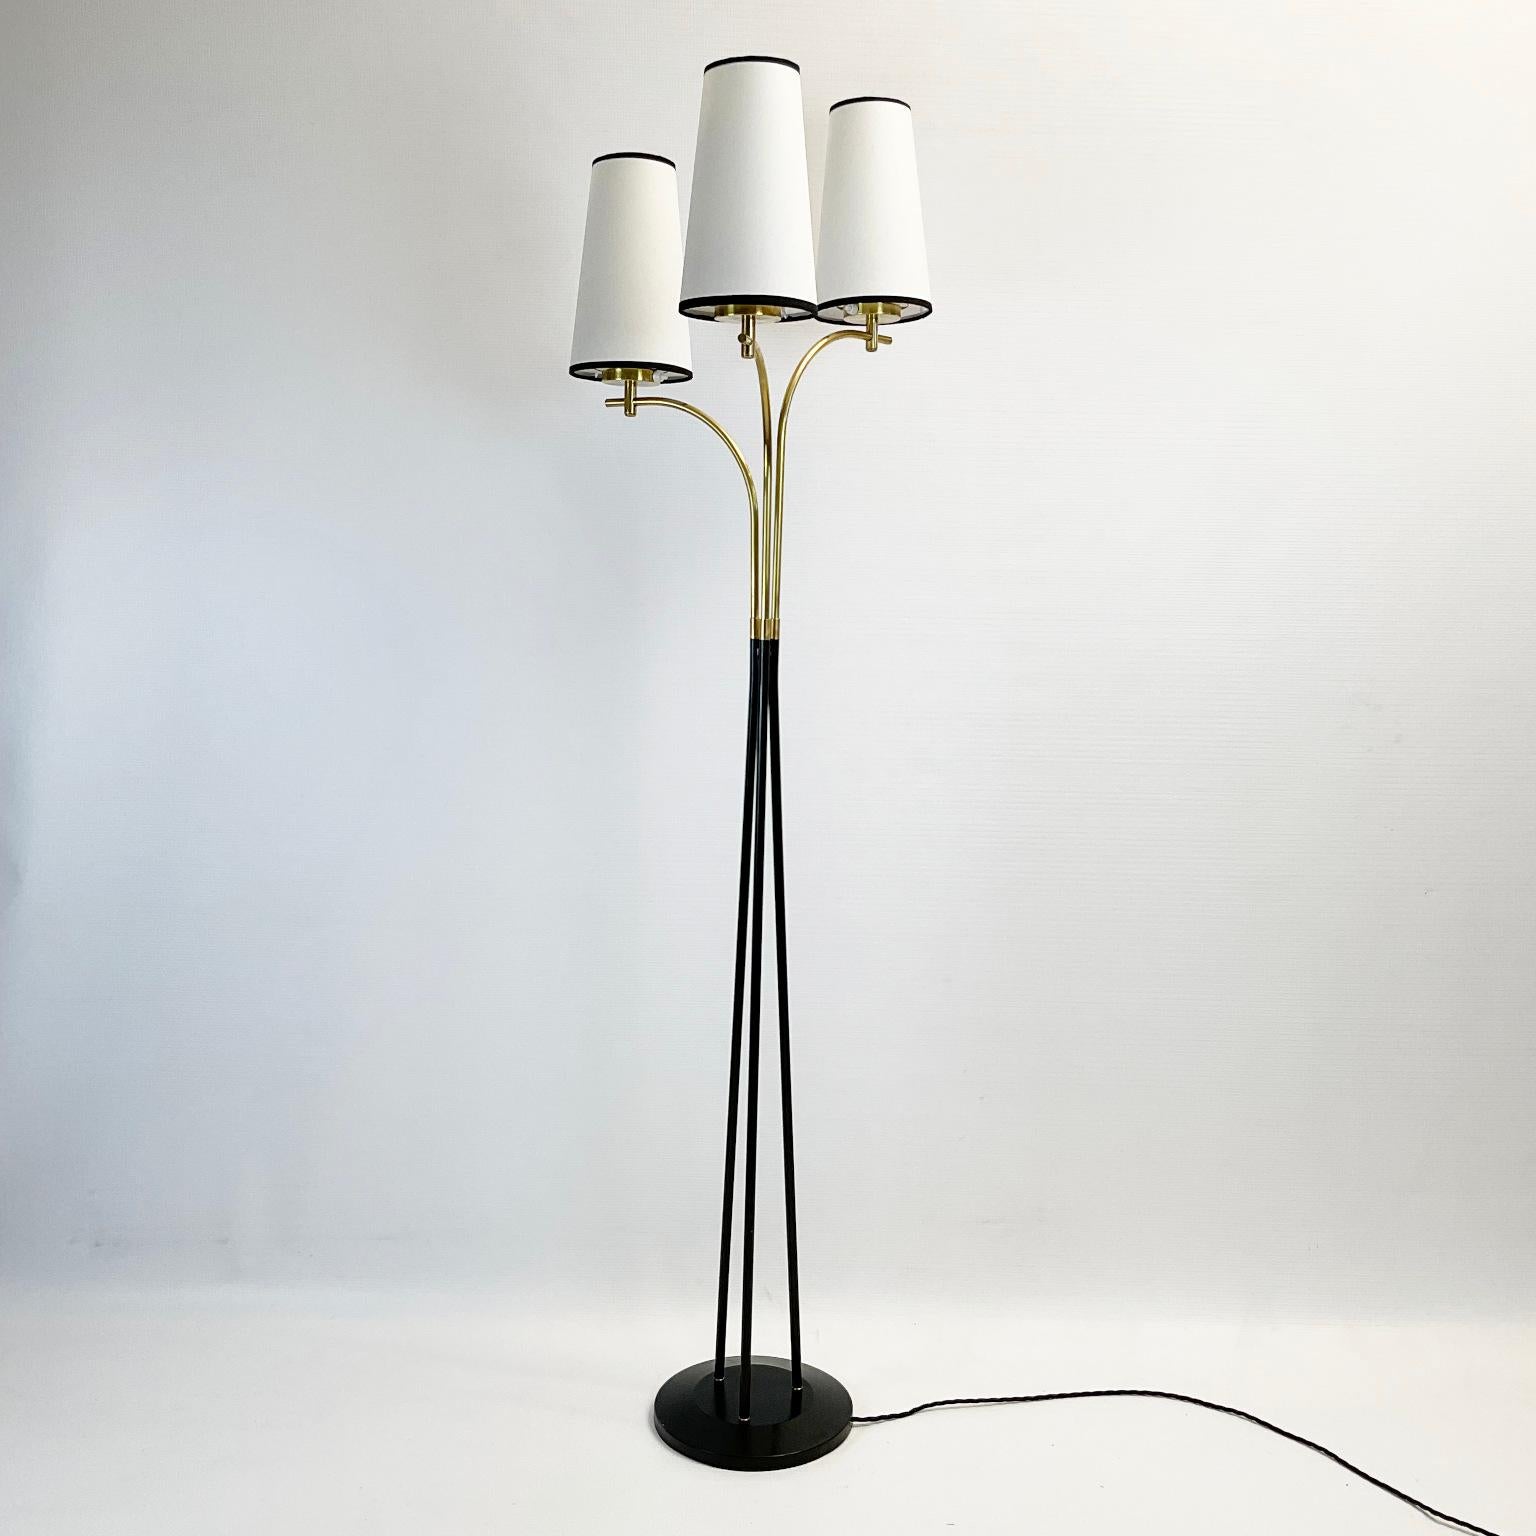 1950s Floor Lamp Attributed to Maison Lunel France 1